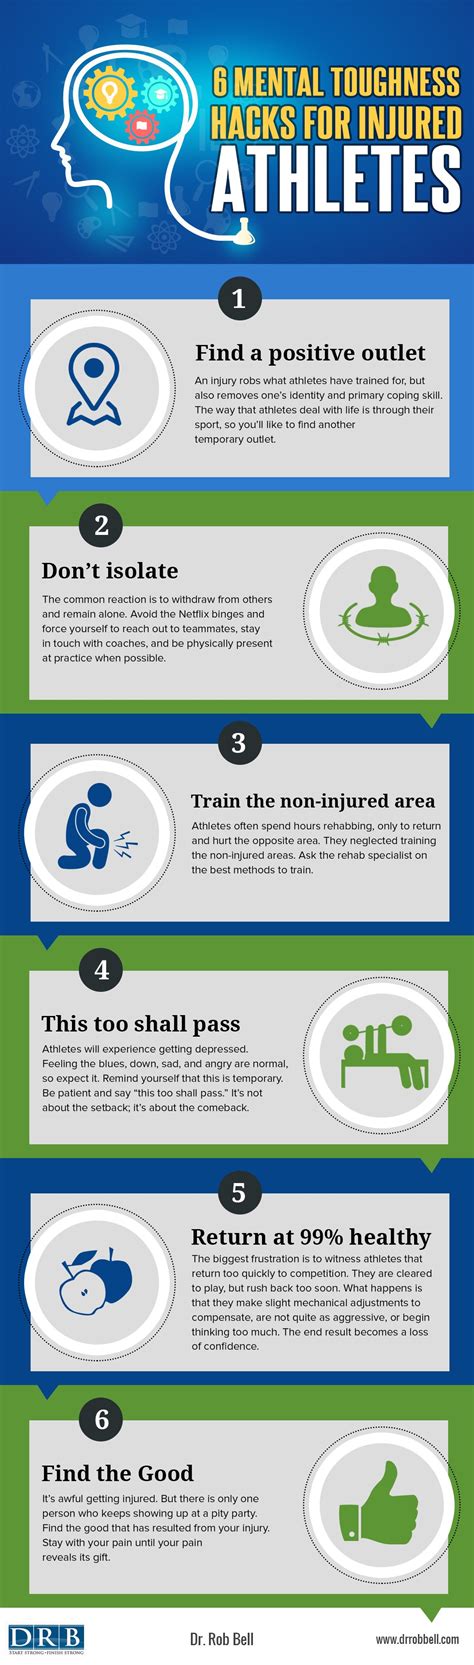 Winning state teaches athletes mental toughness tactics to stay poised and composed under. (Infographic) 6 Mental Toughness Hacks for Injured Athletes